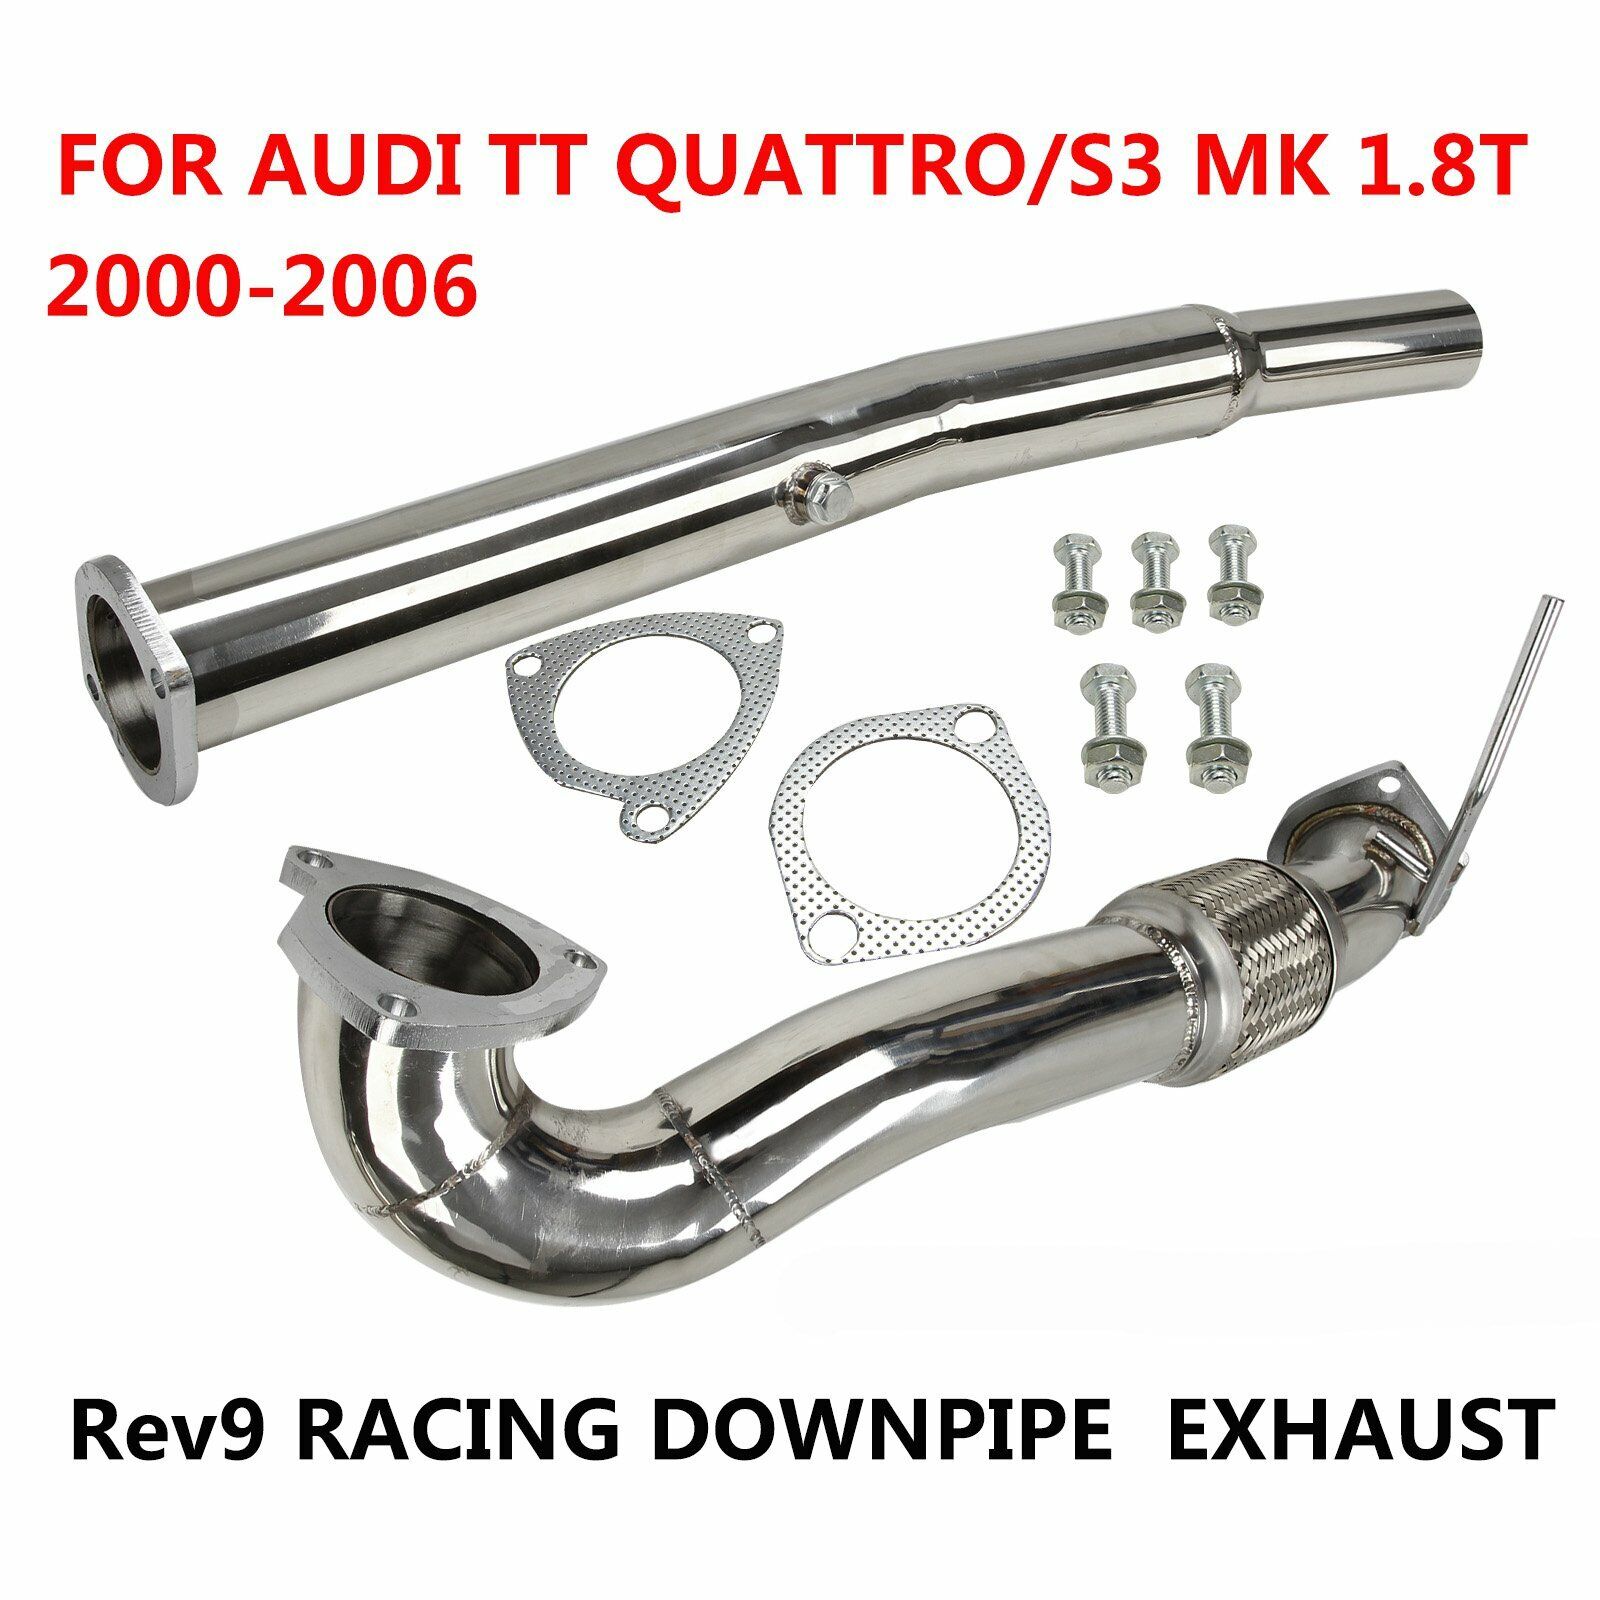 Stainless Turbo Racing Exhaust Downpipe FOR Audi 00-06 TT Quattro/S3 Mk1 1.8T